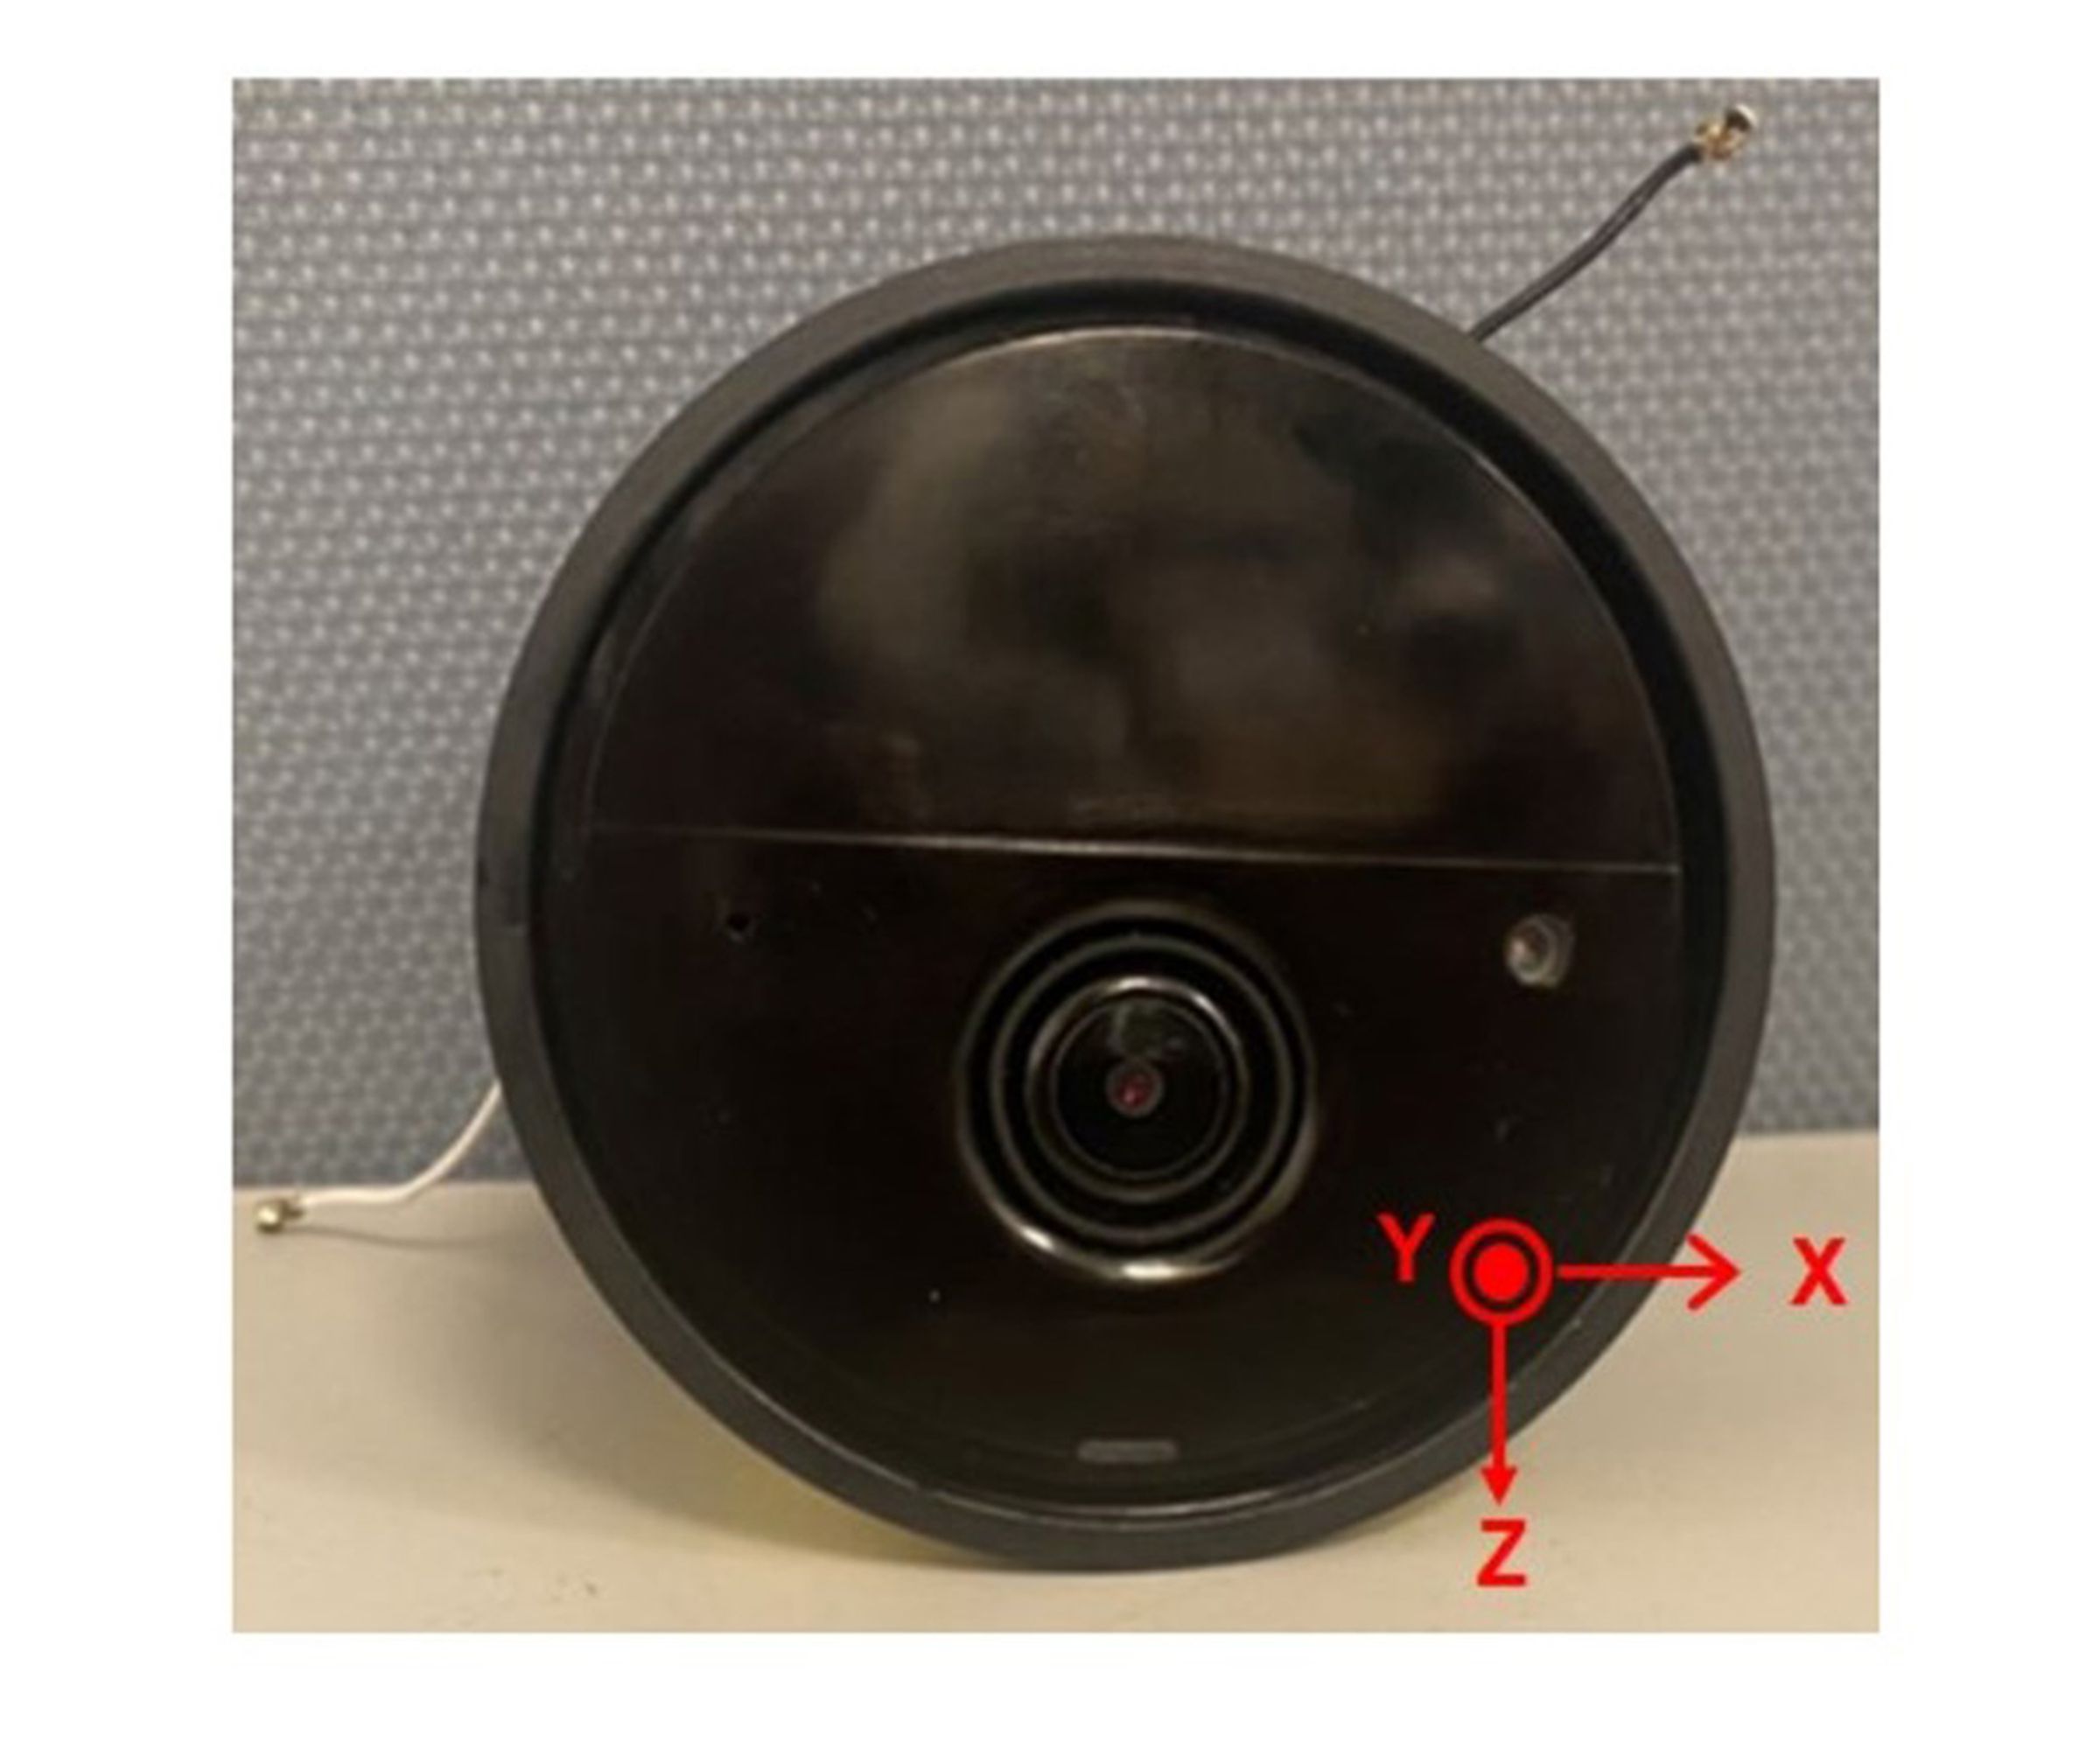 An image of the new Philips Hue security cameras taken from an FCC filing.